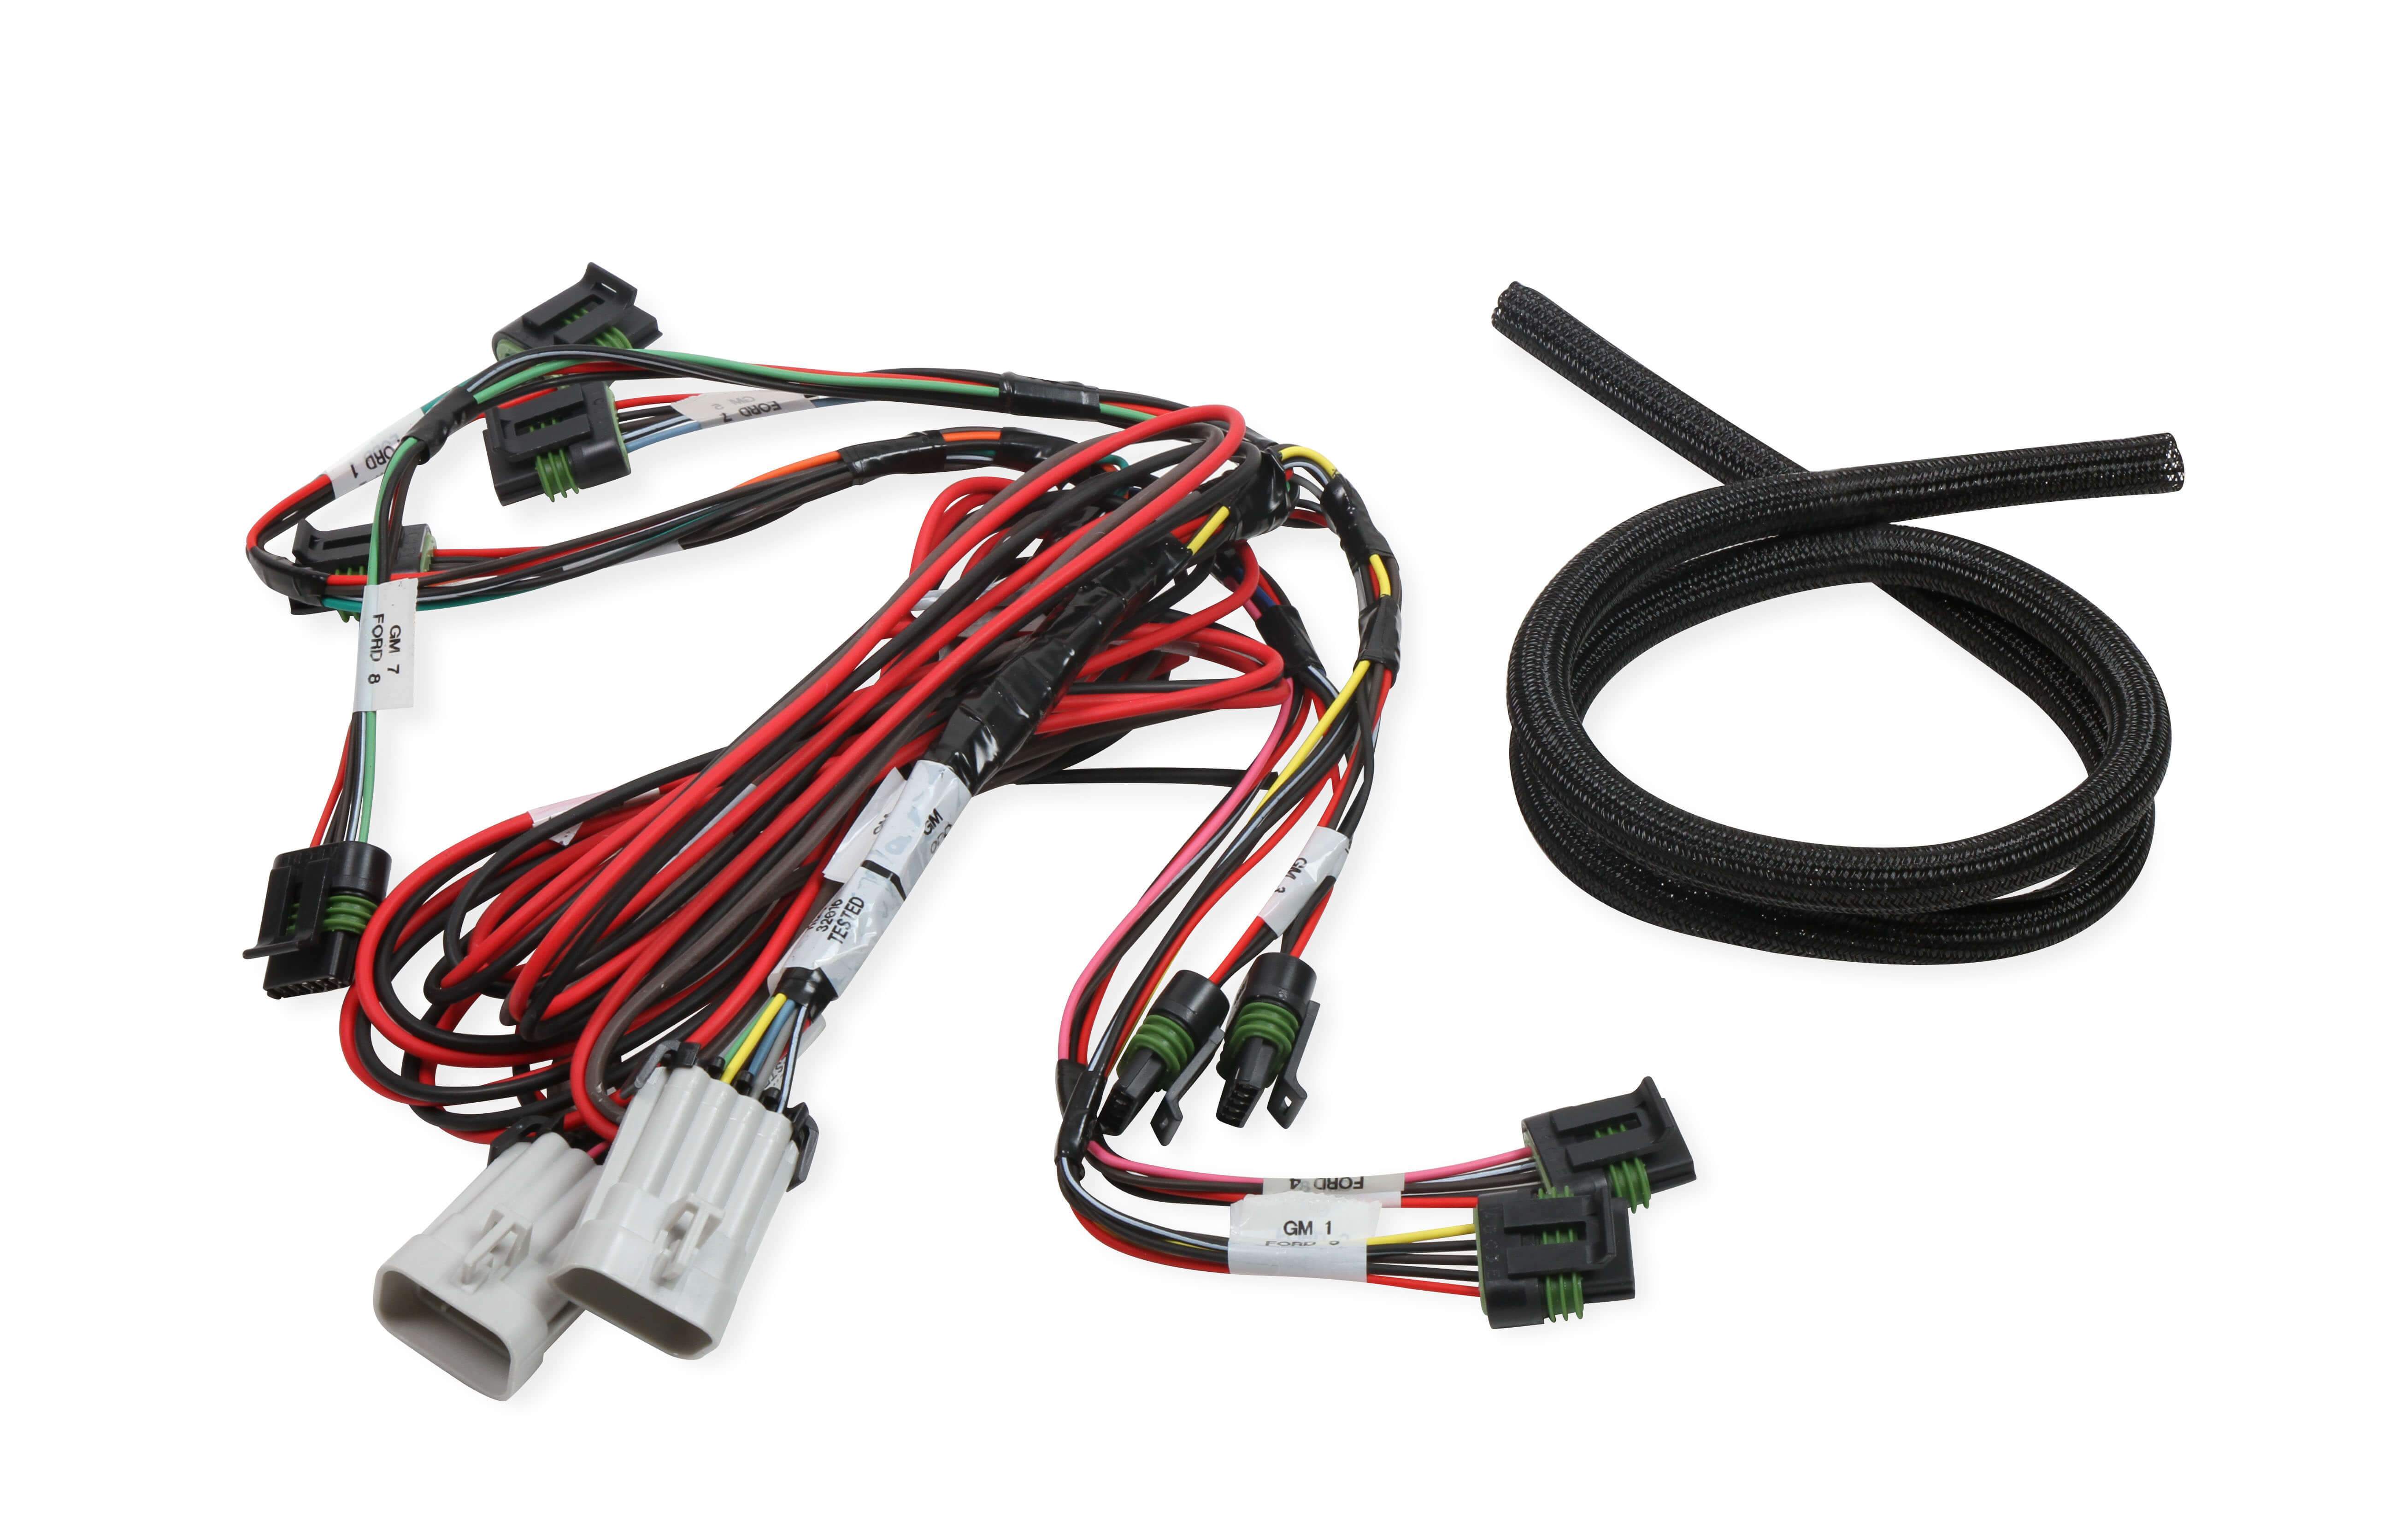  HP EFI Smart Coil Sub Harness Performance Holley Performance parts